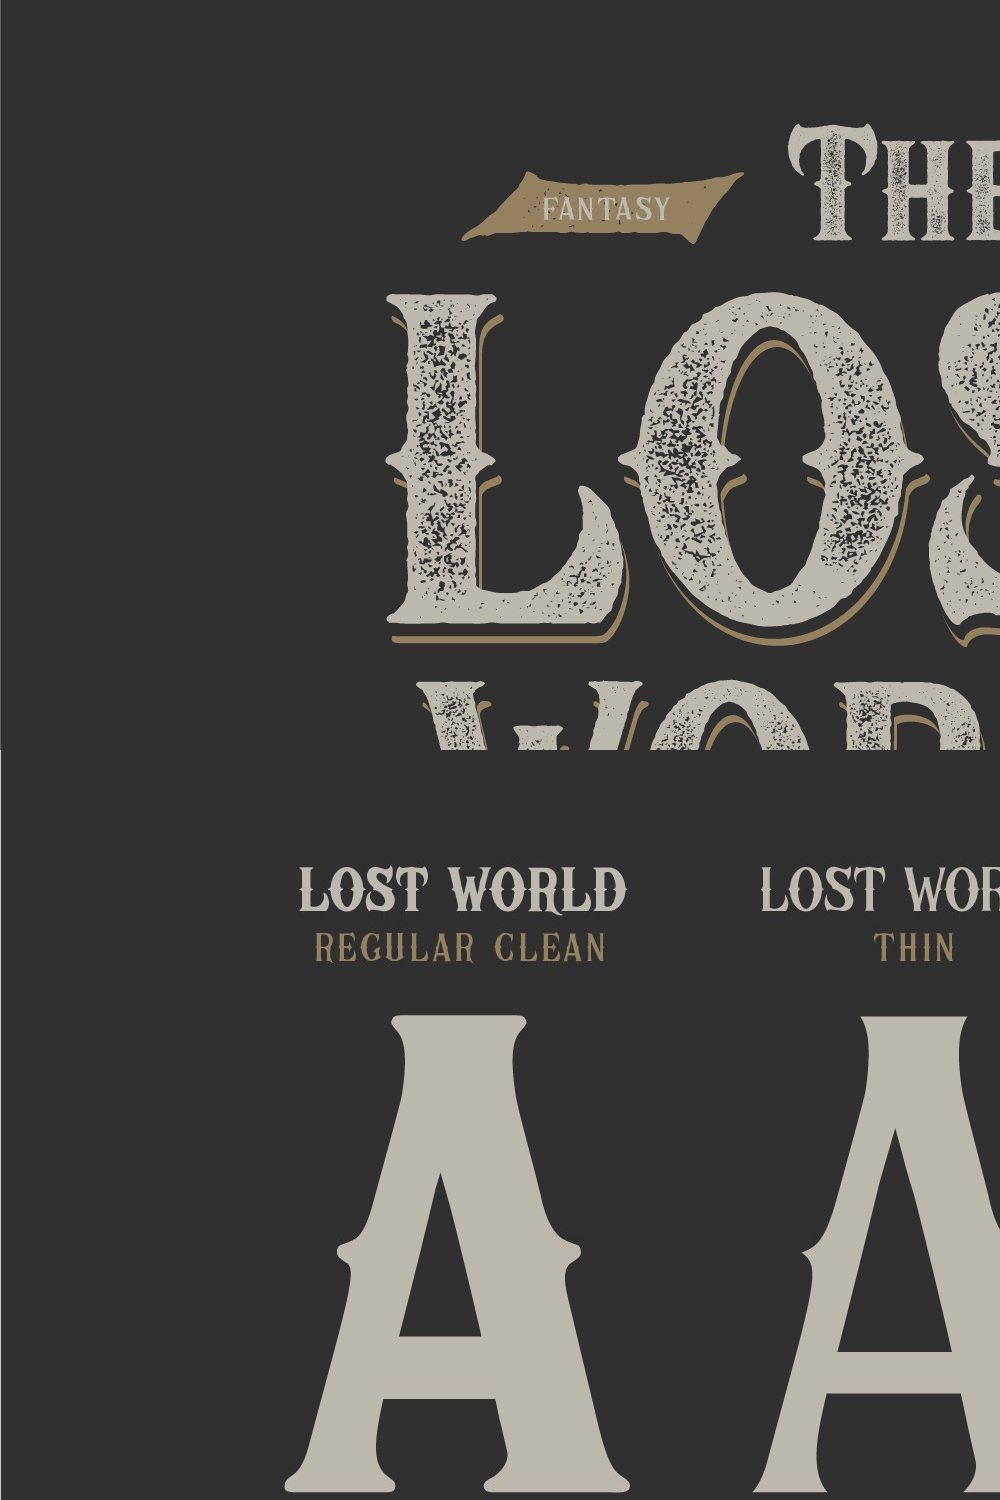 The Lost World pinterest preview image.